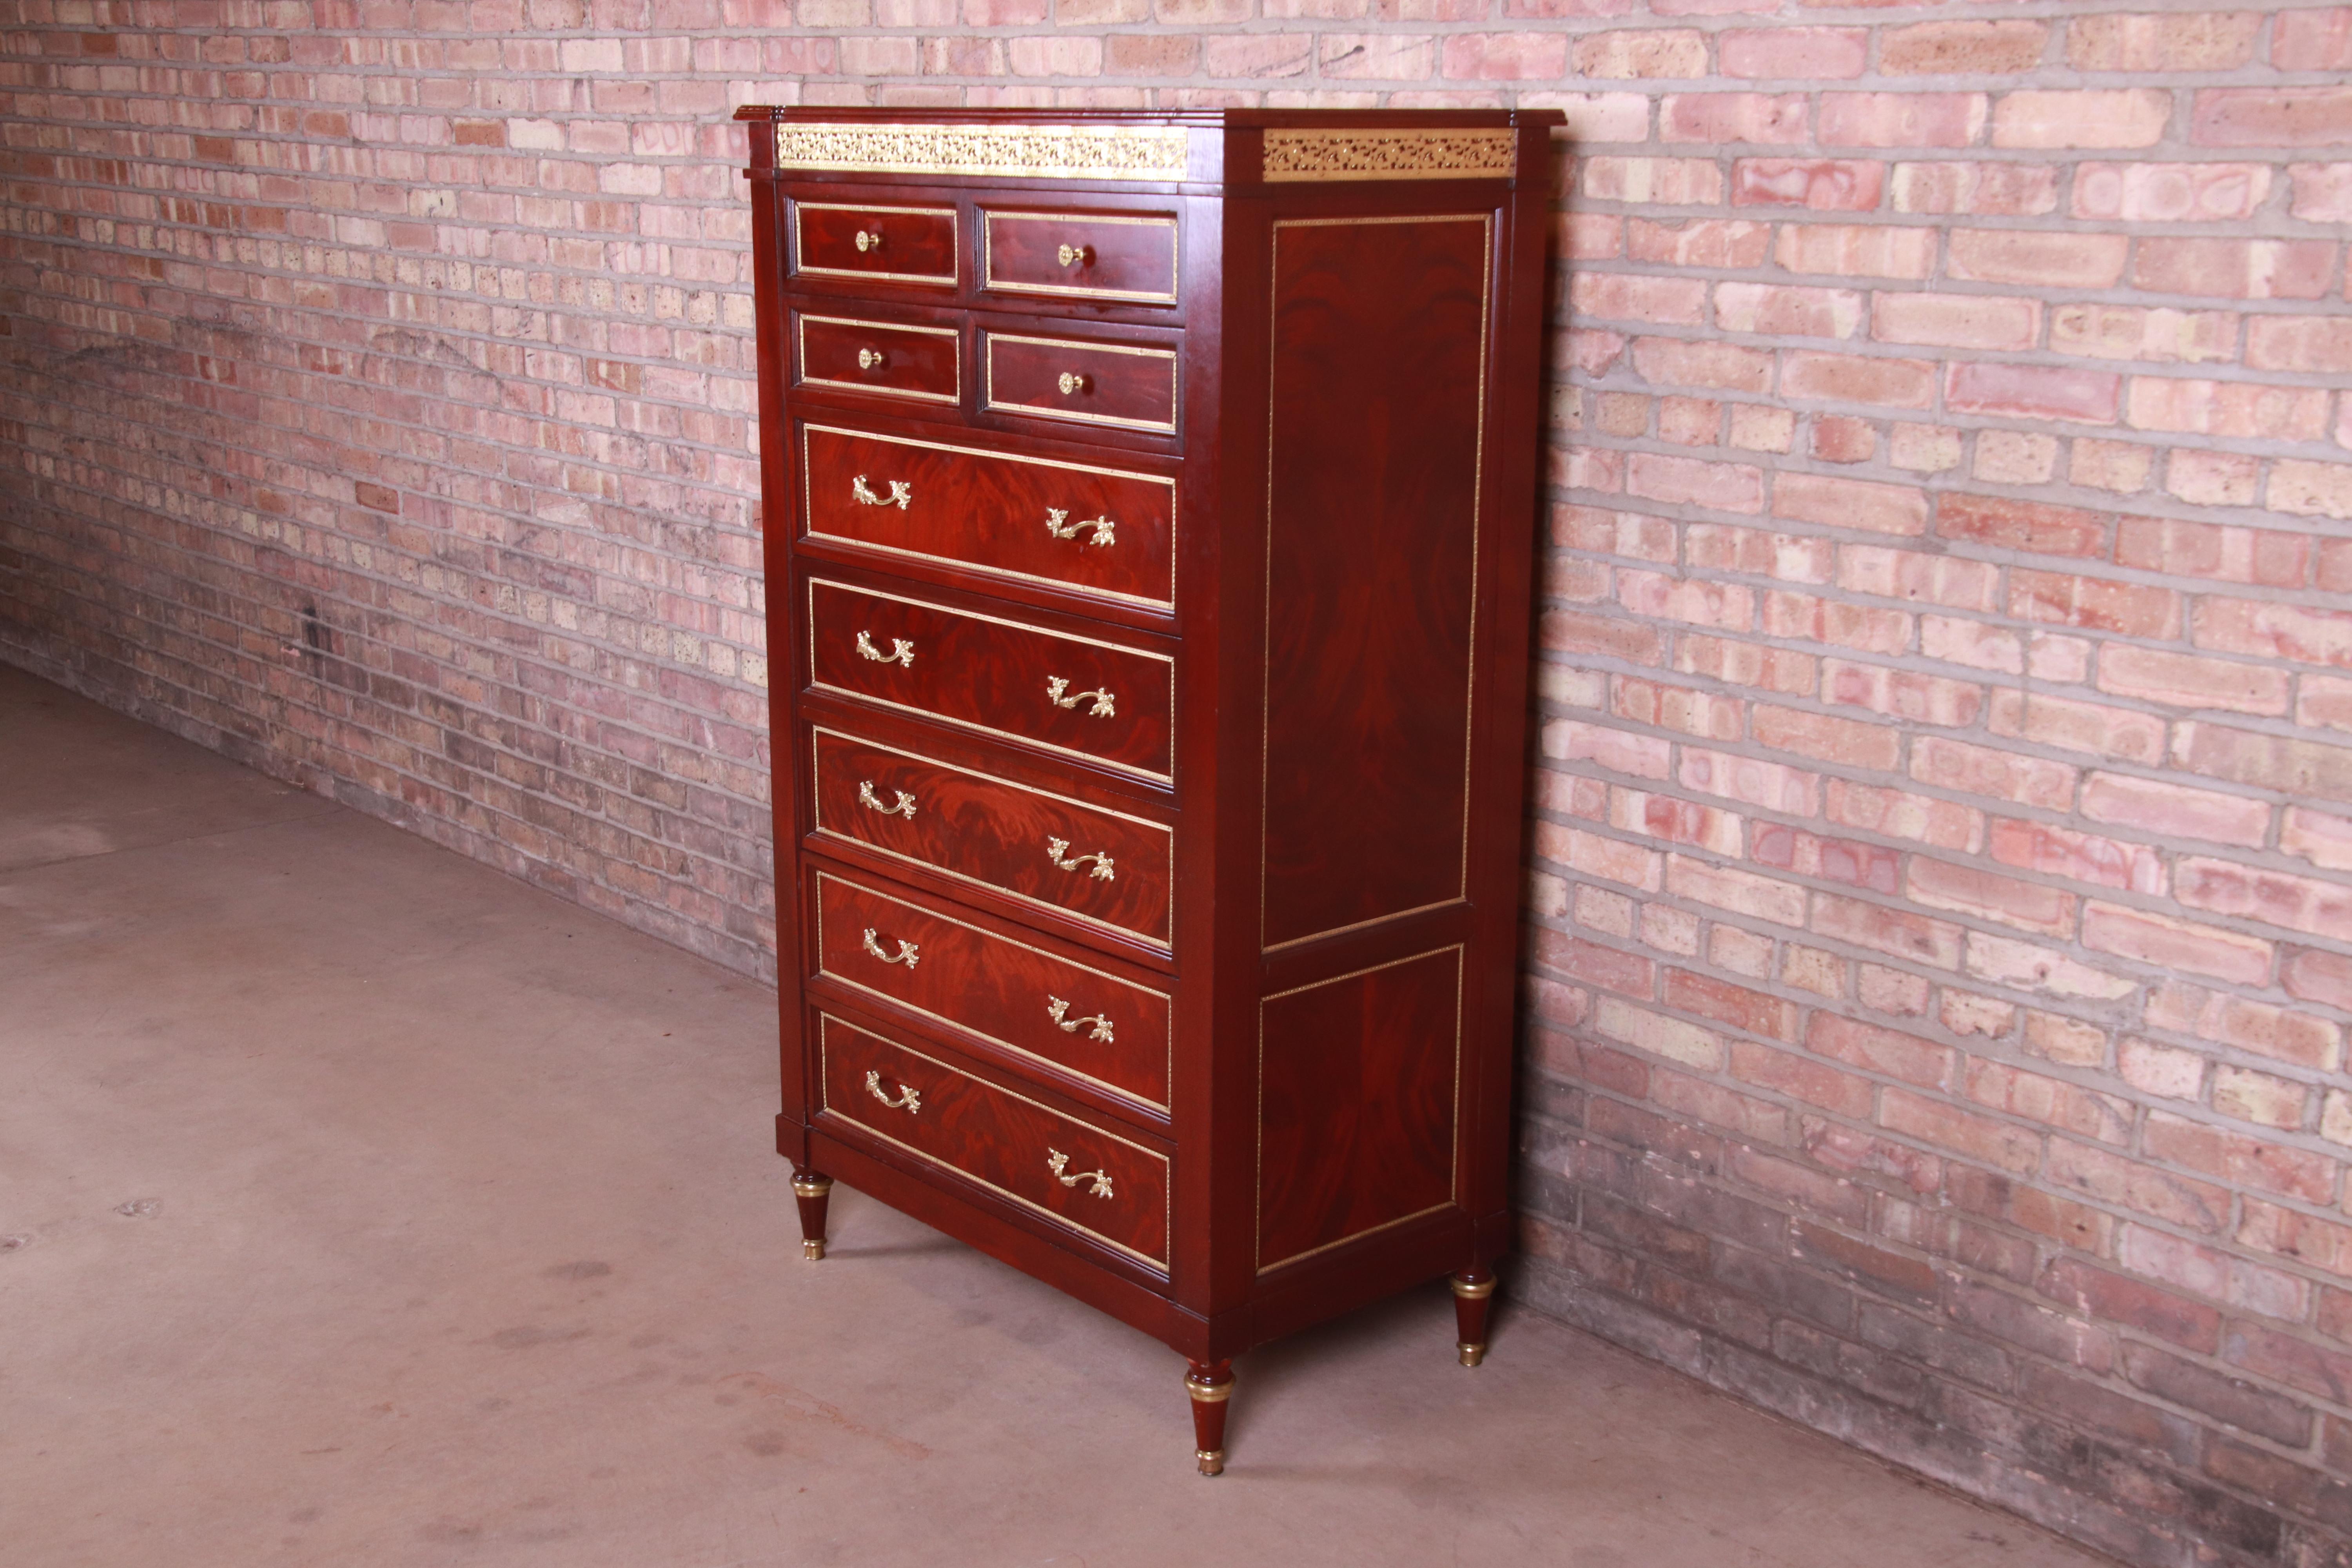 A beautiful French Regency Louis XVI style seven-drawer highboy dresser,

late 20th century

Flame mahogany, with mounted brass ormolu and original brass hardware and trim.

Measures: 36